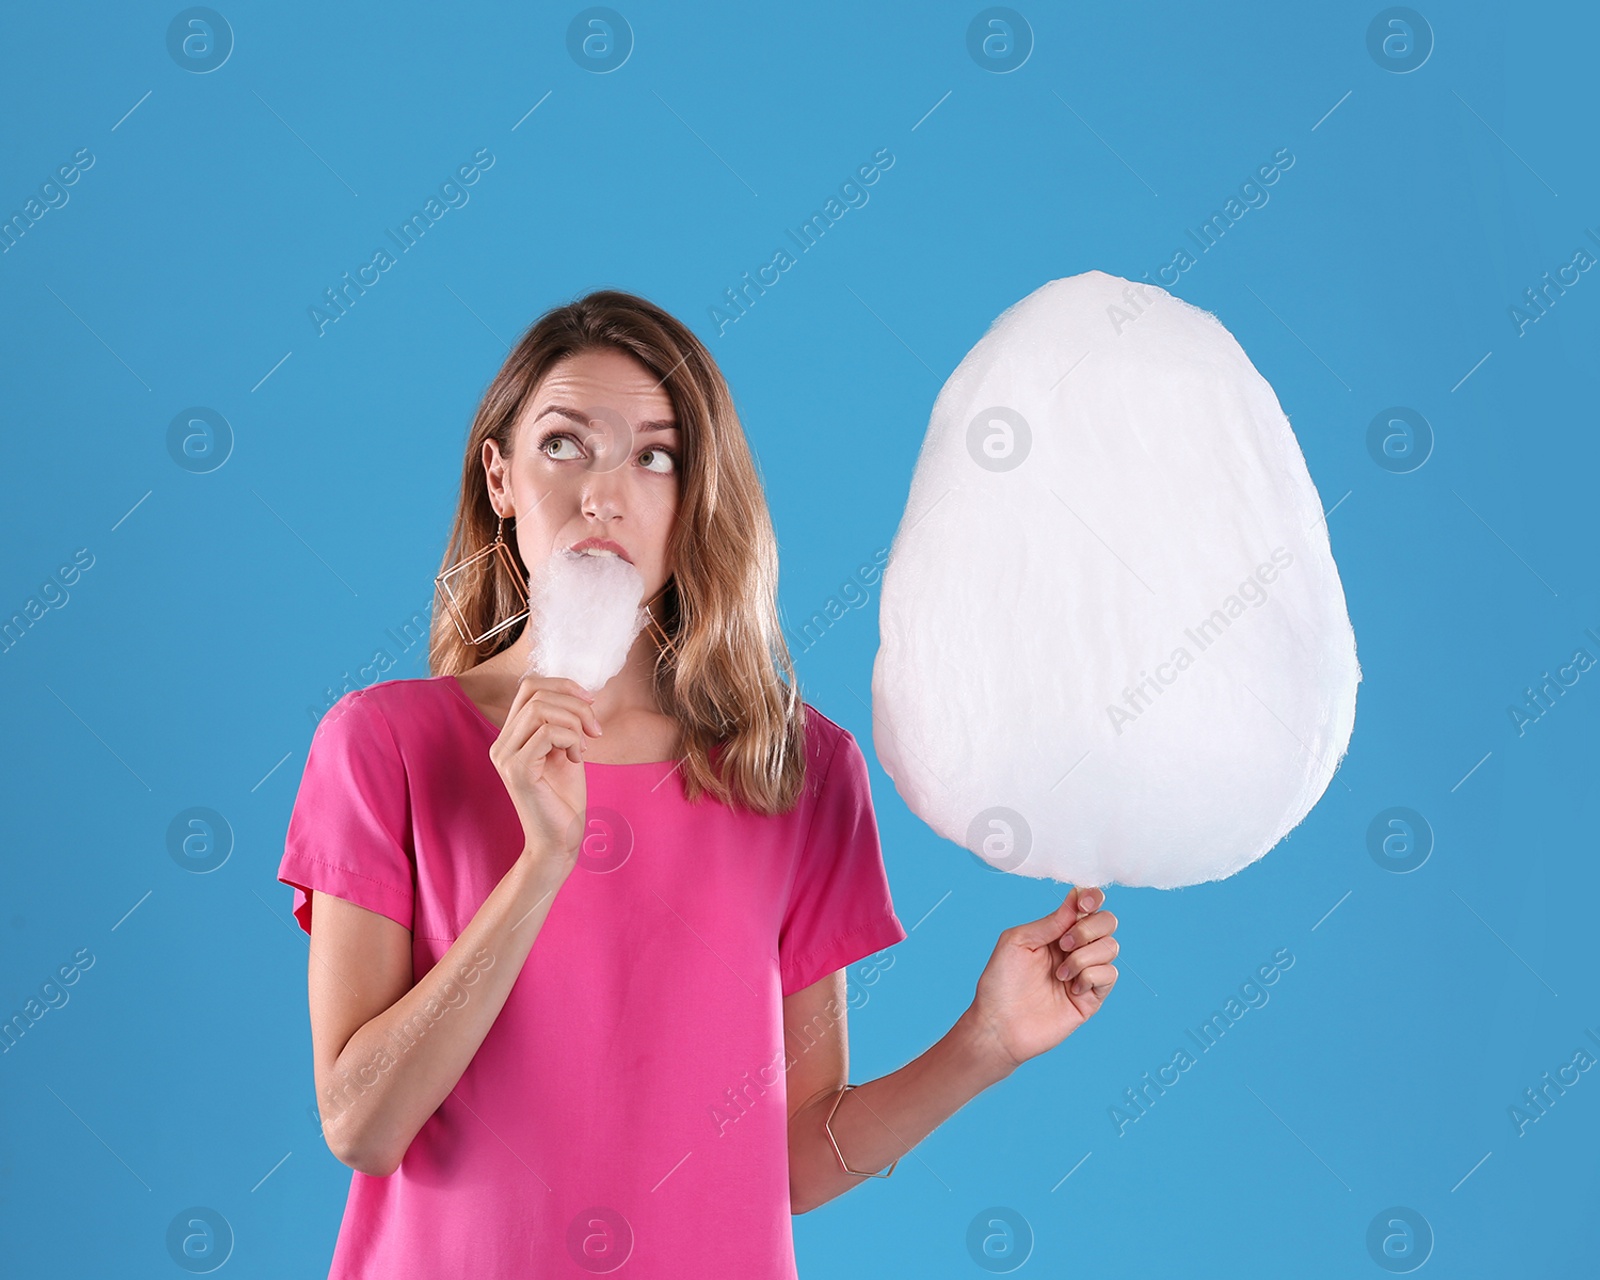 Photo of Emotional young woman eating cotton candy on blue background